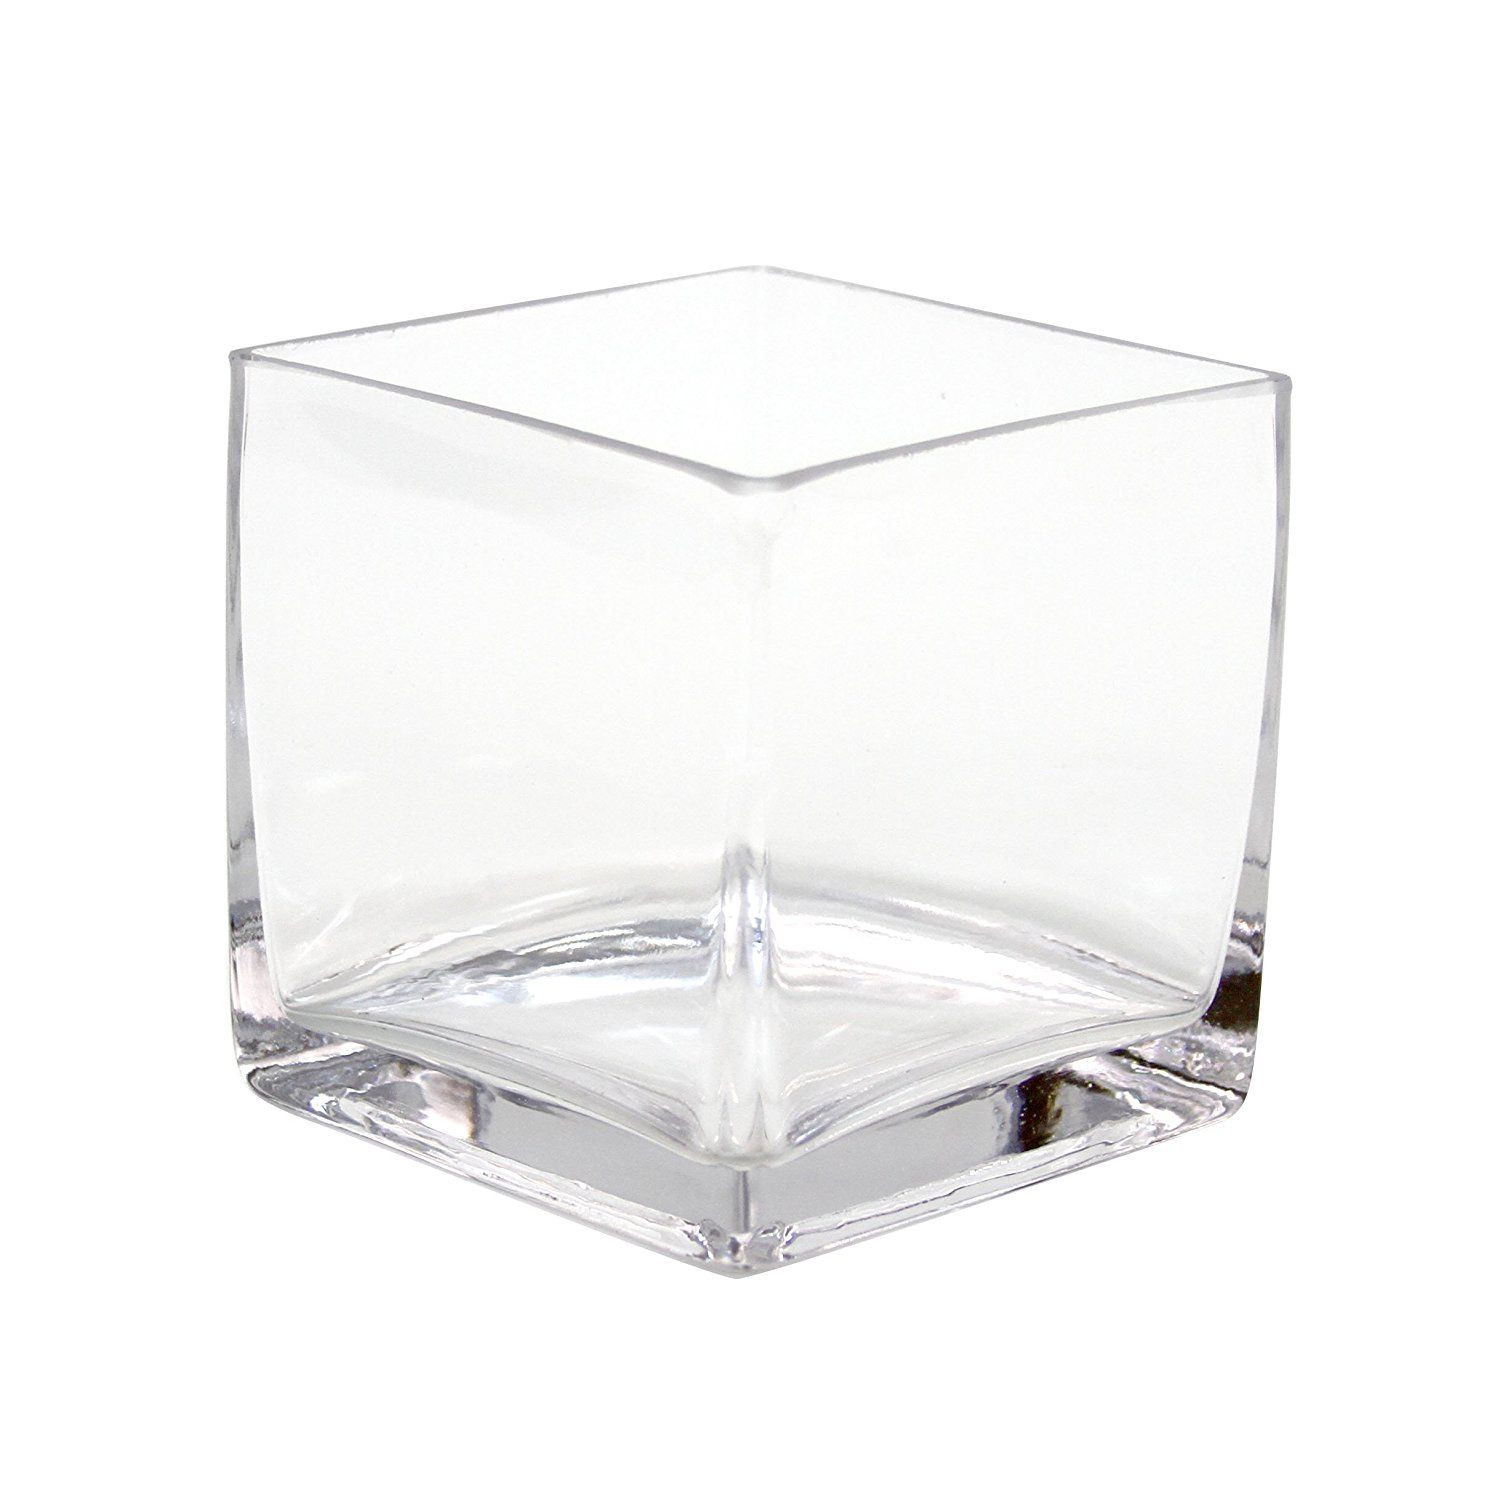 28 Lovely 4 Inch Bud Vase 2024 free download 4 inch bud vase of koyal wholesale 404343 12 pack cube square glass vases 4 by 4 by 4 within glass